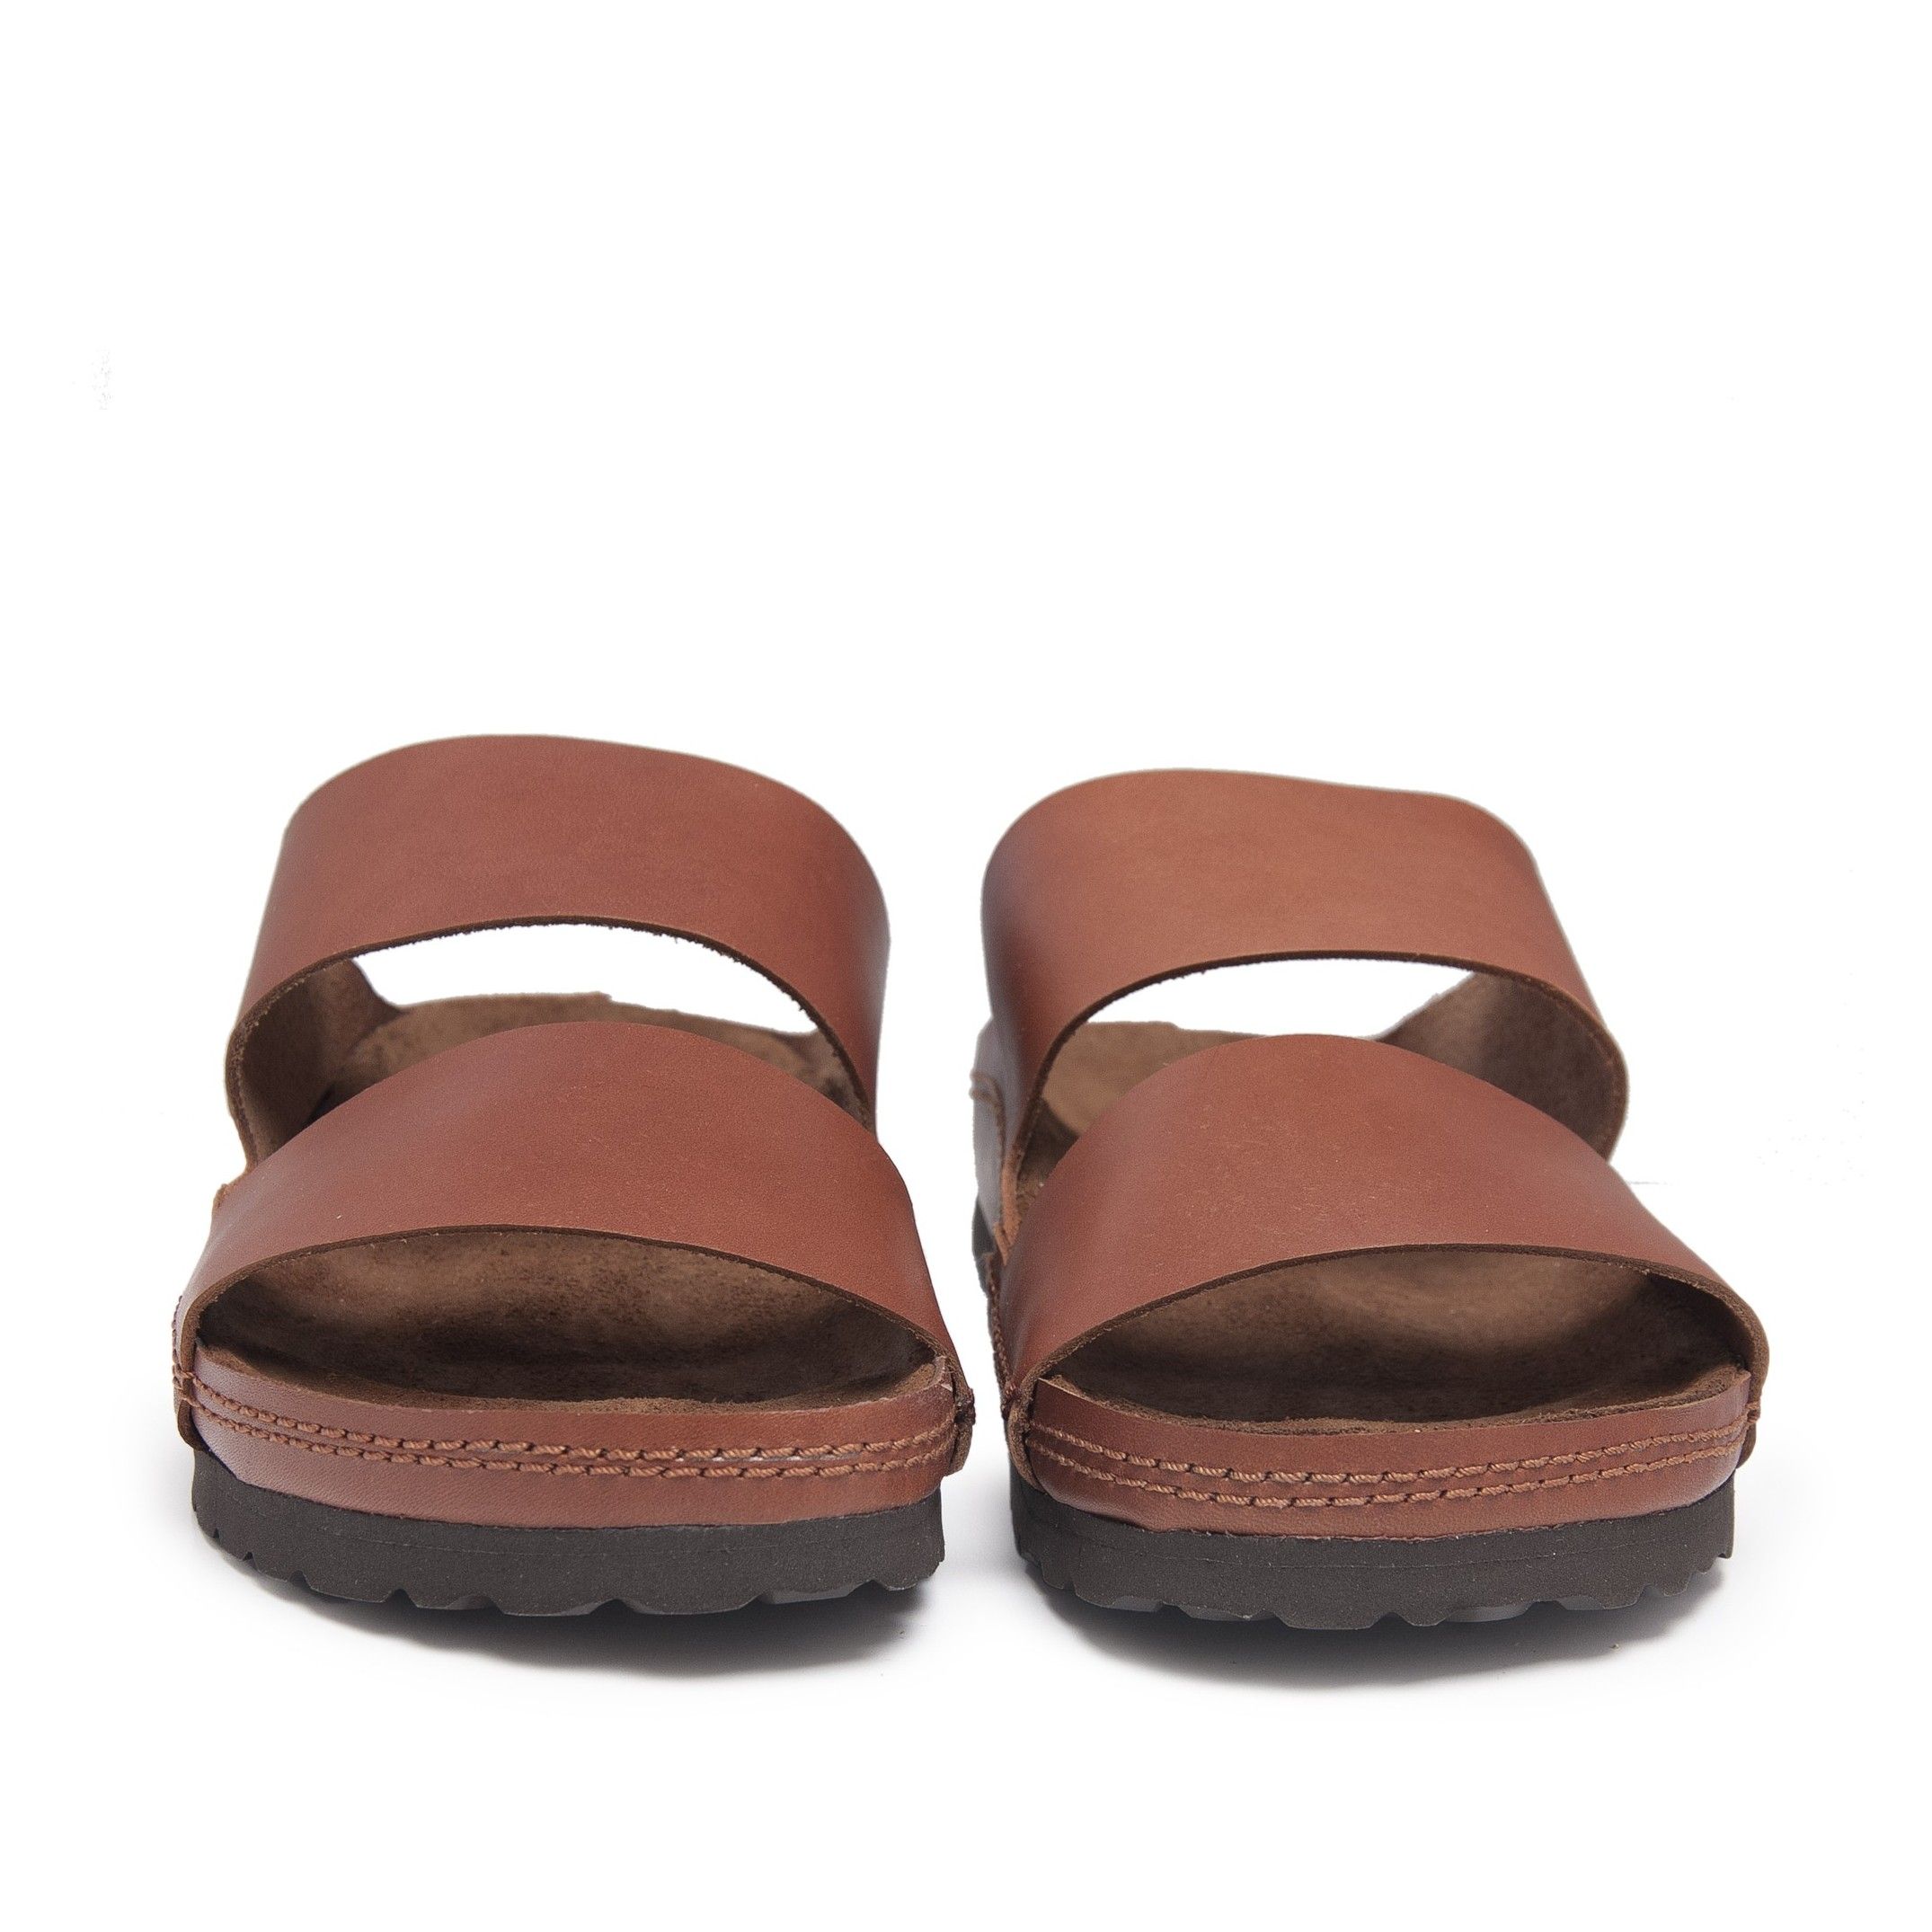 Bio sandal wide leather strips. Upper and inner made of leather. Insole: leather. Sole: EVA. This product is manufactured in Spain.